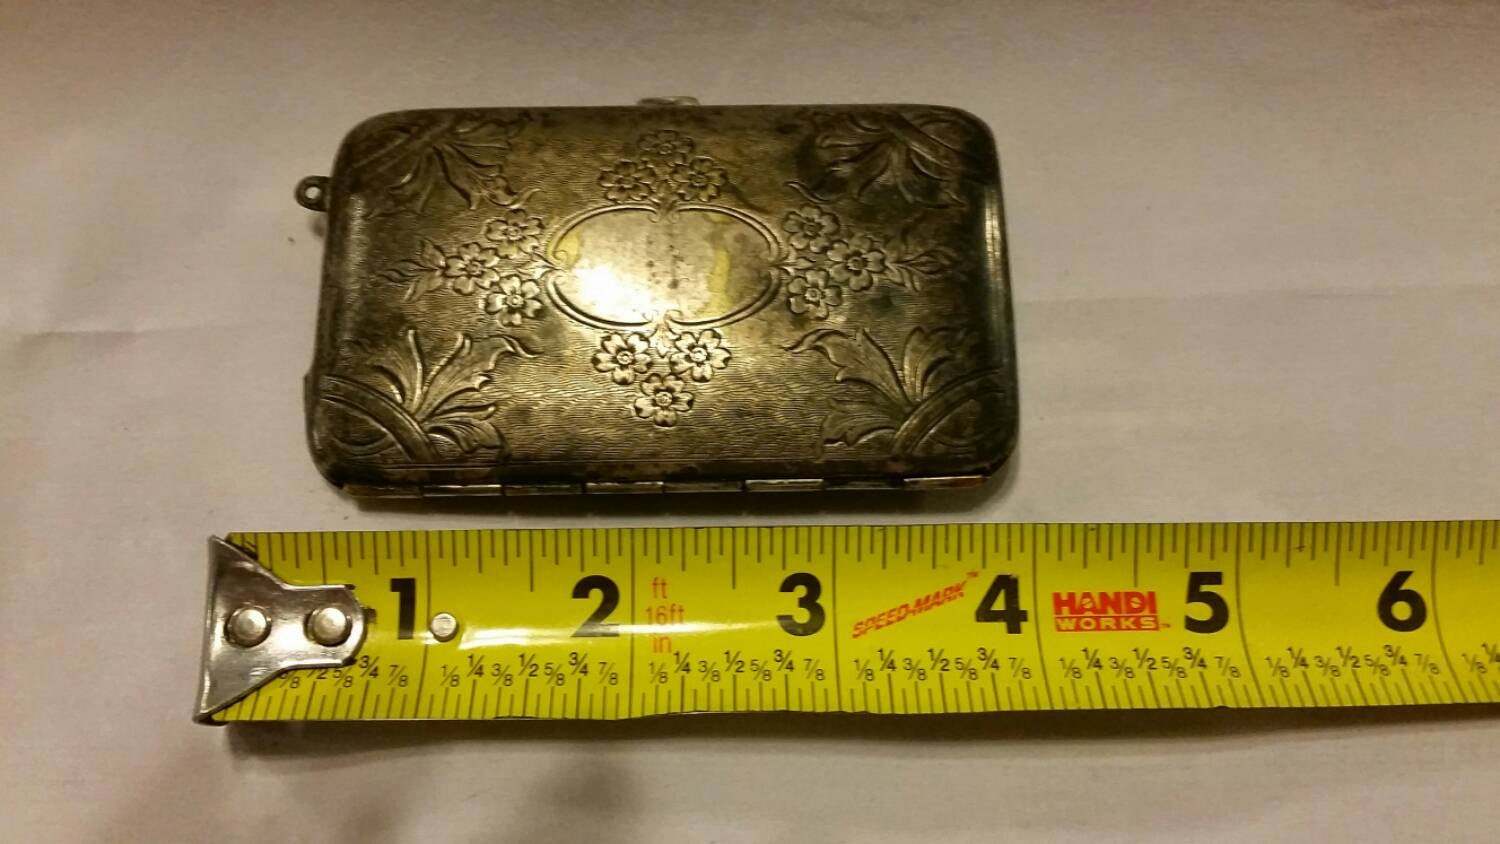 Antique silver plate coin purse by MyPorcelainPig on Etsy